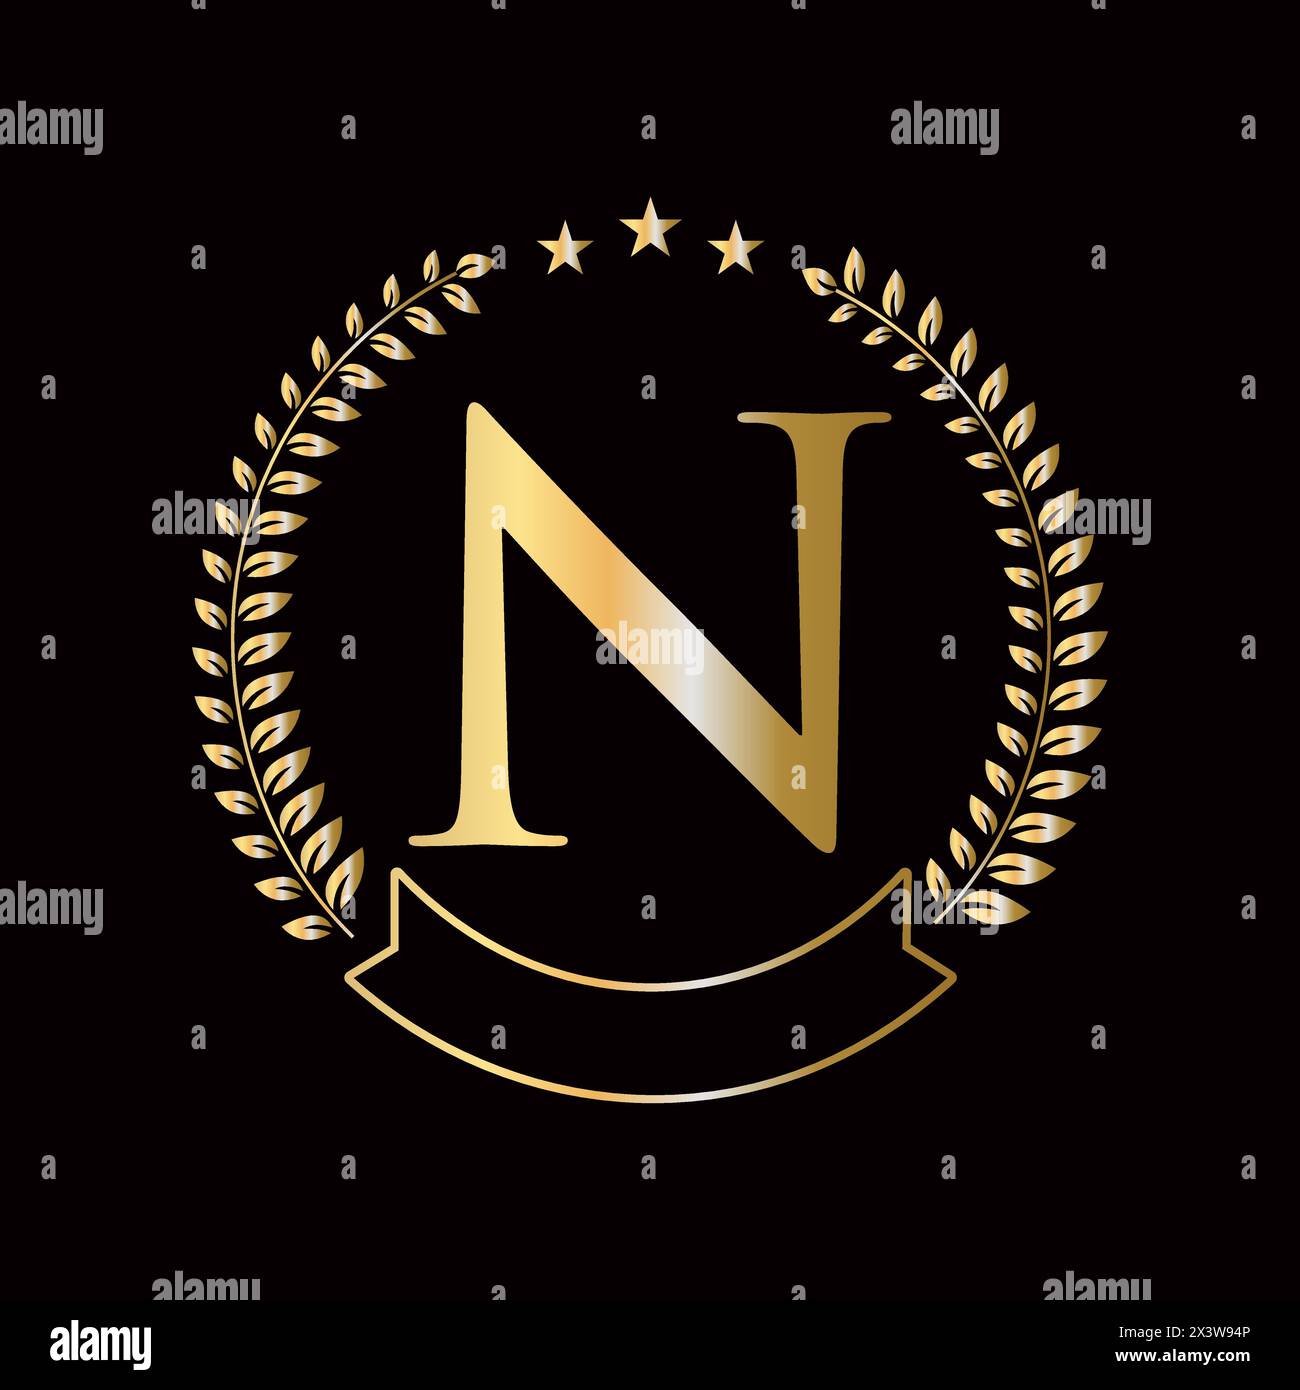 Initial Letter N Logo Concept For Education, University And Academy Symbol Stock Vector